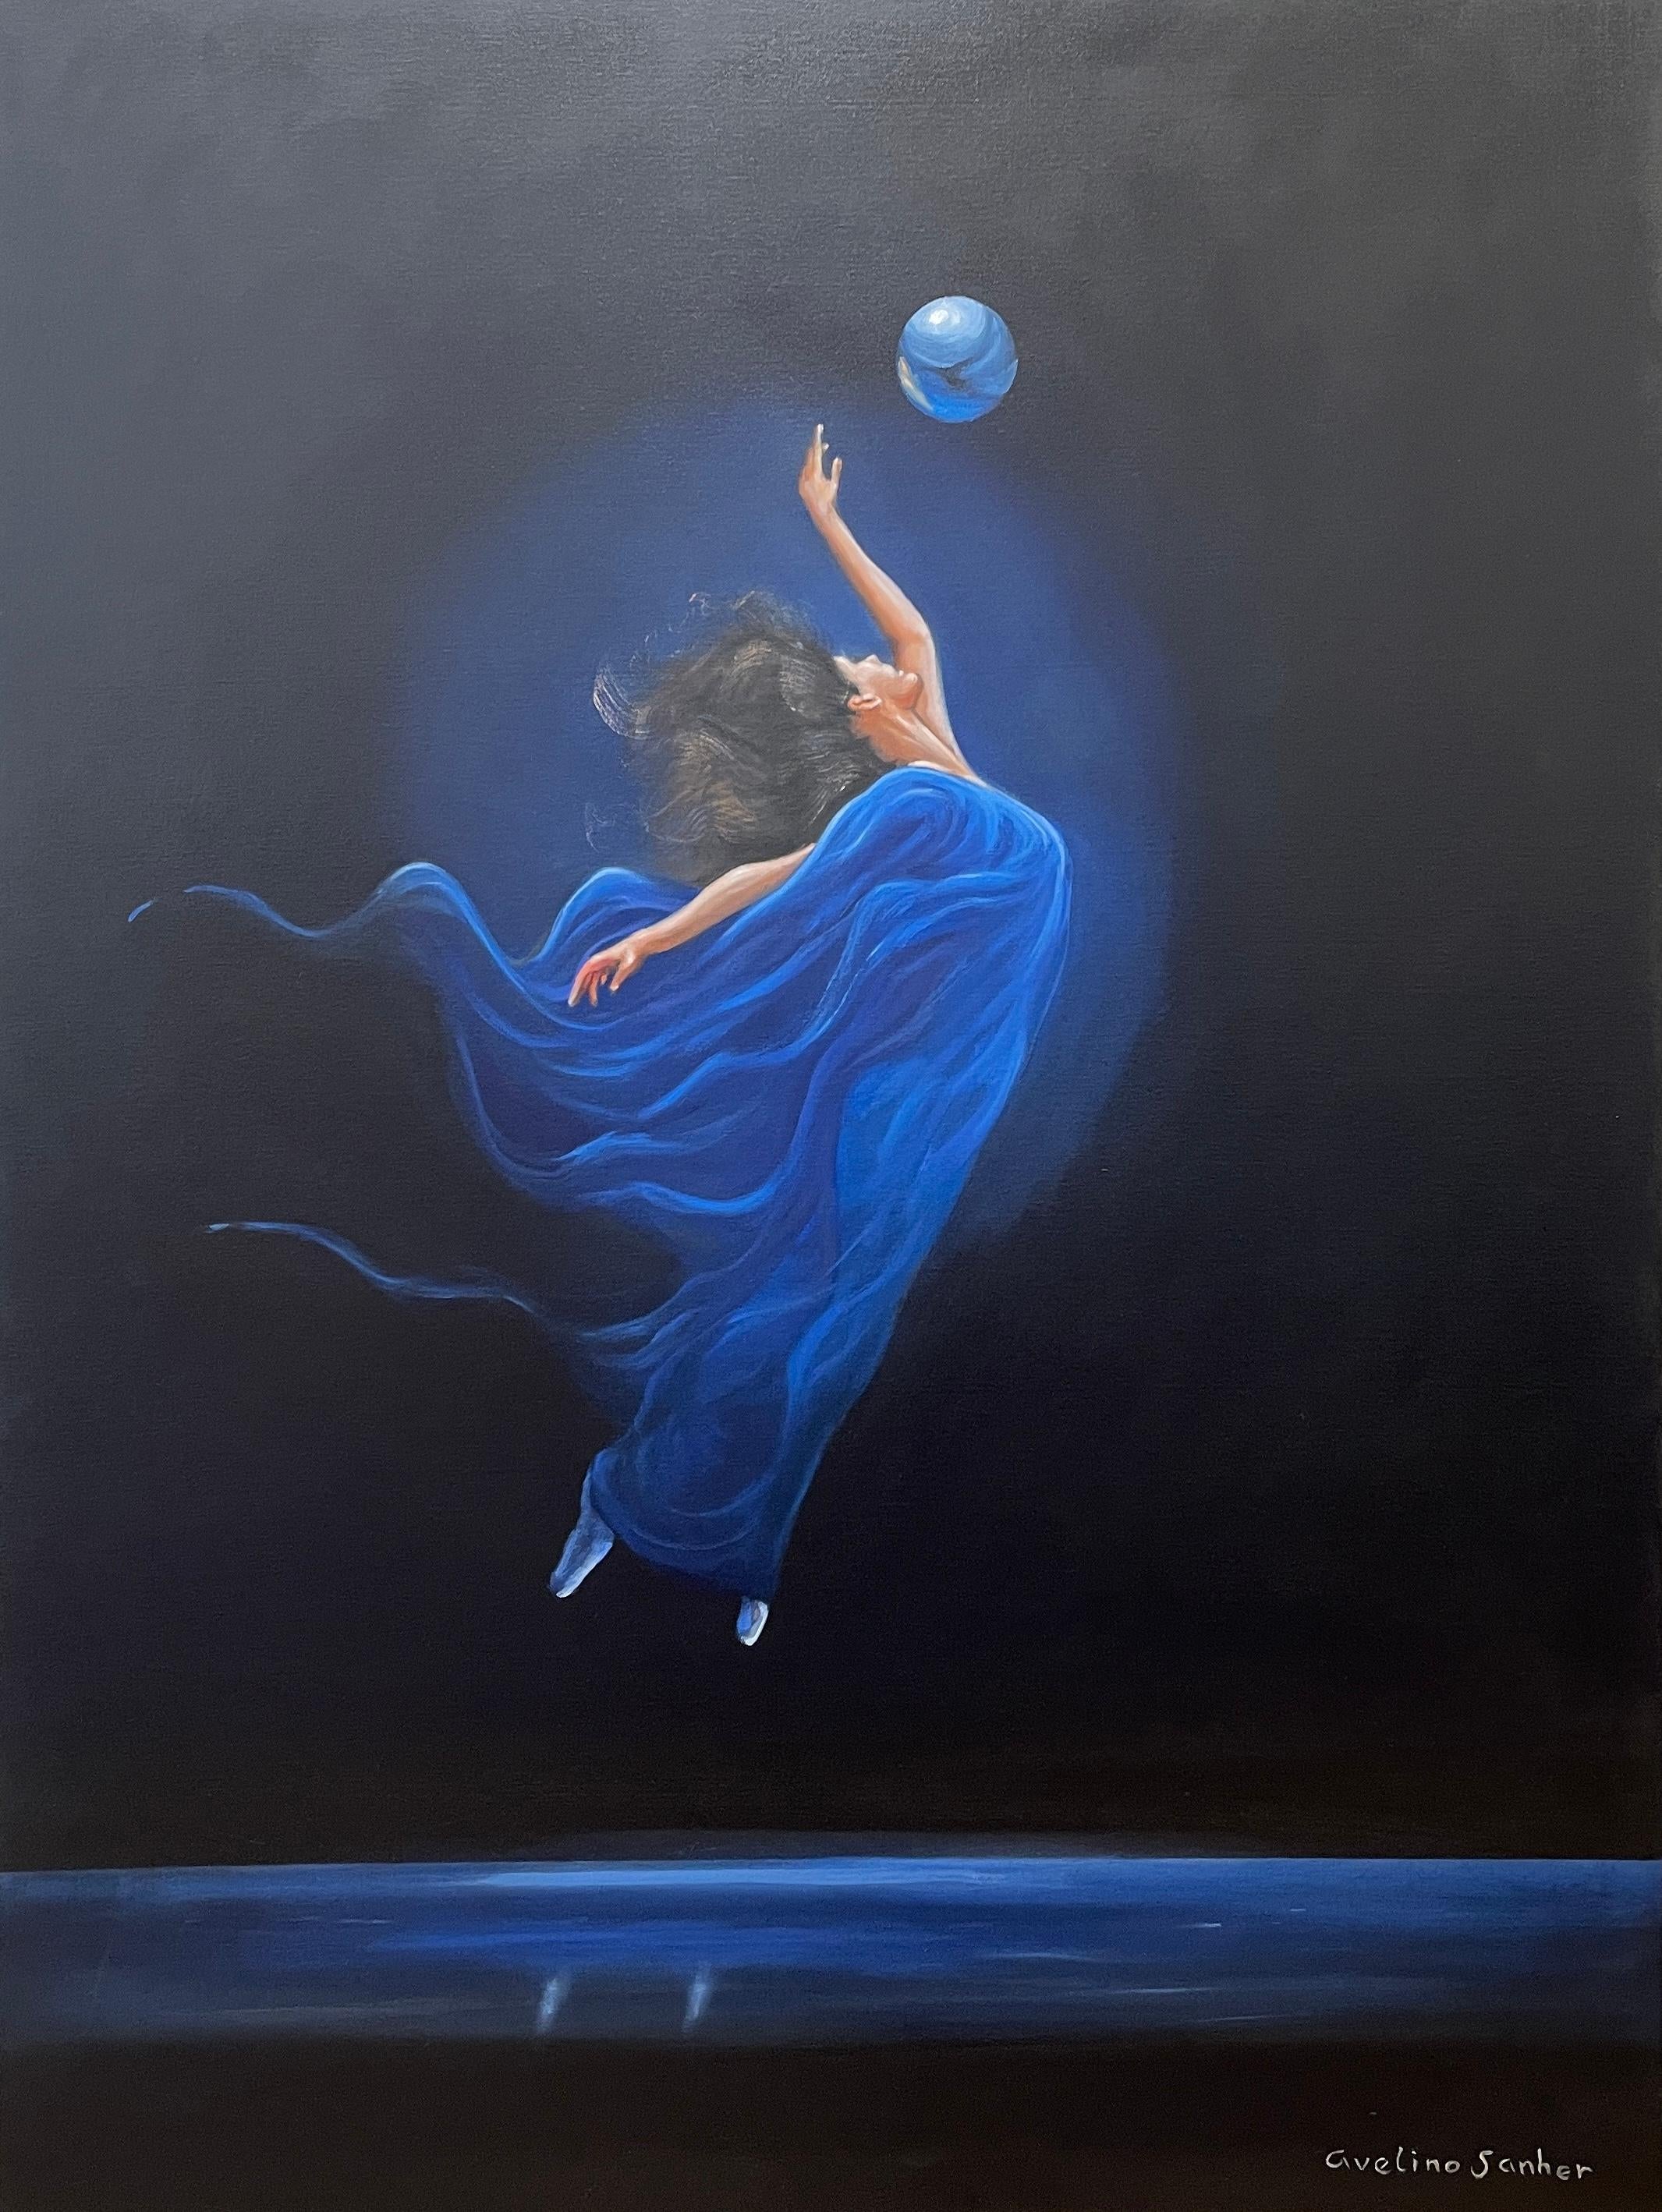 Avelino Sanher Figurative Painting - 'Melodia' - Ballerina in Blue - The Ballet Series - Figurative Oil Painting